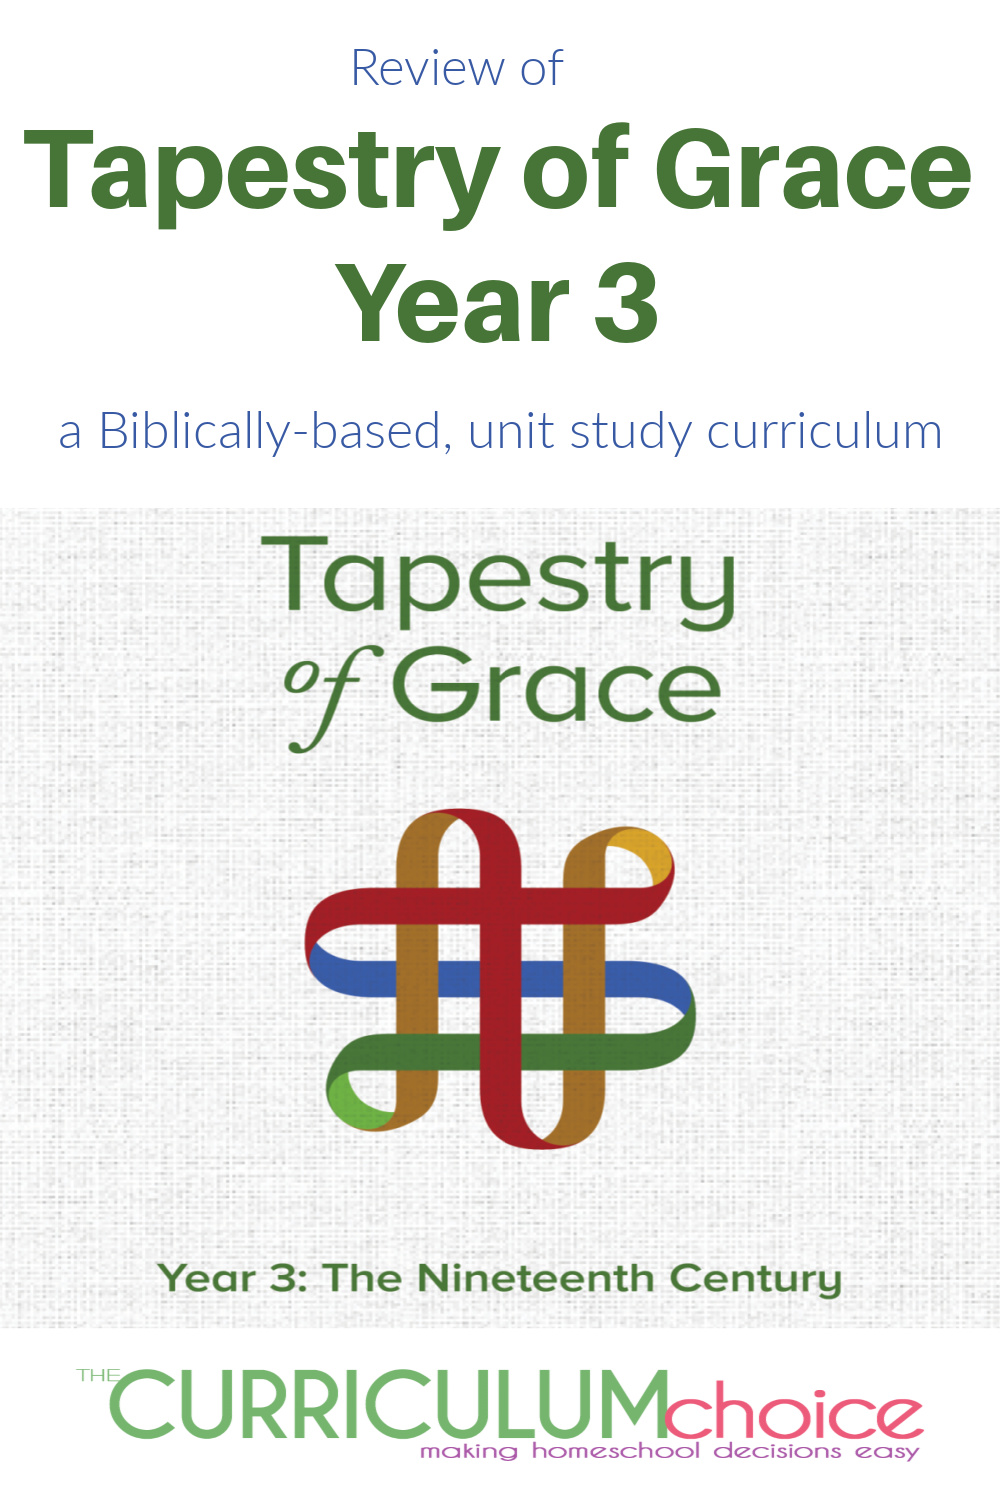 Tapestry of Grace Year 3 is part of a four year Christian, classical, Charlotte Mason unit study curriculum that covers multiple subjects. A review from The Curriculum Choice.